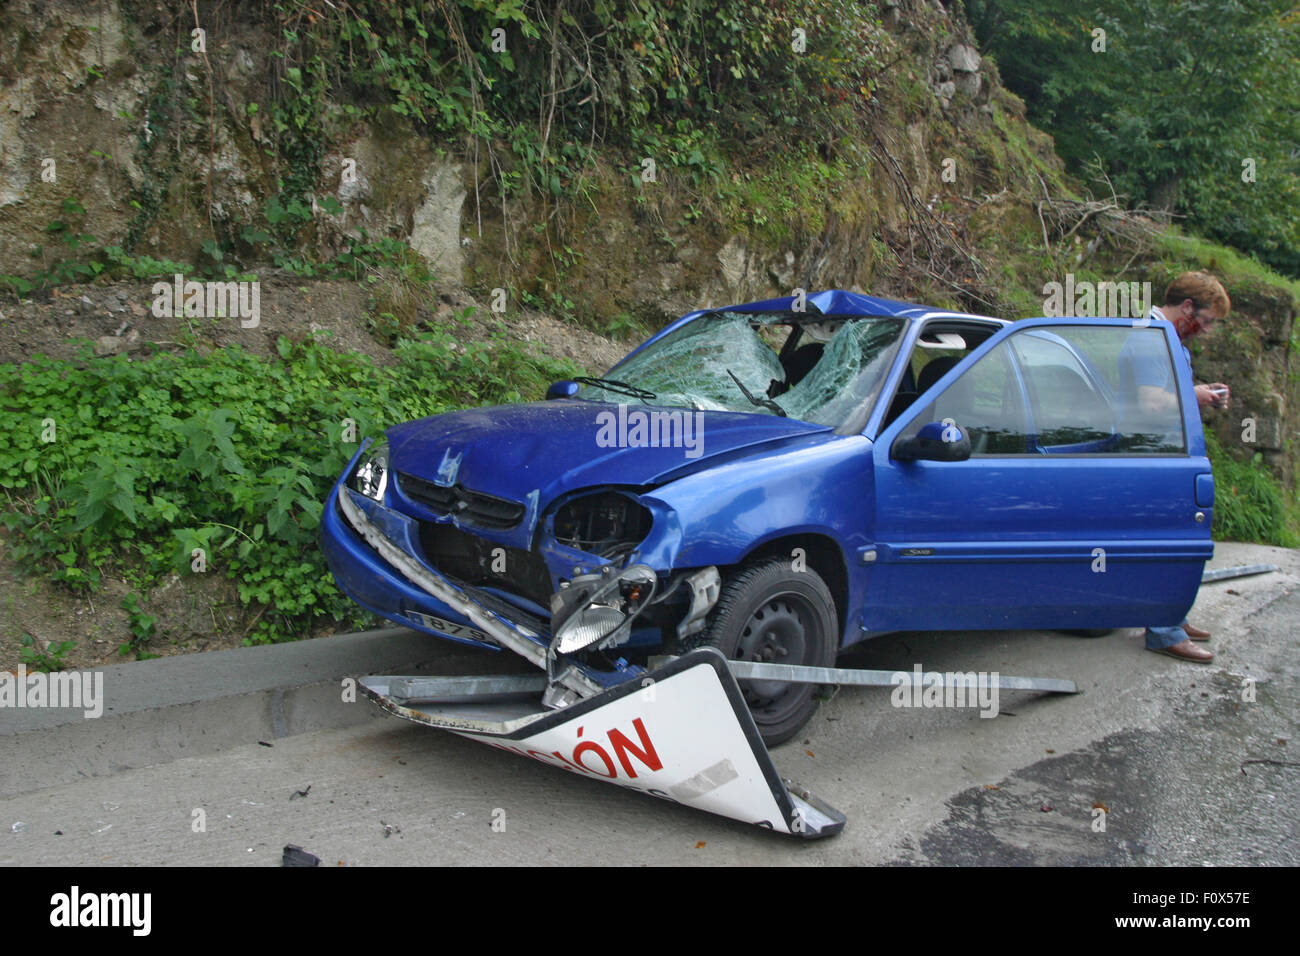 Blue car crash on road, accident as stone bolder went through windscreen, driver escaped unhurt. Stock Photo